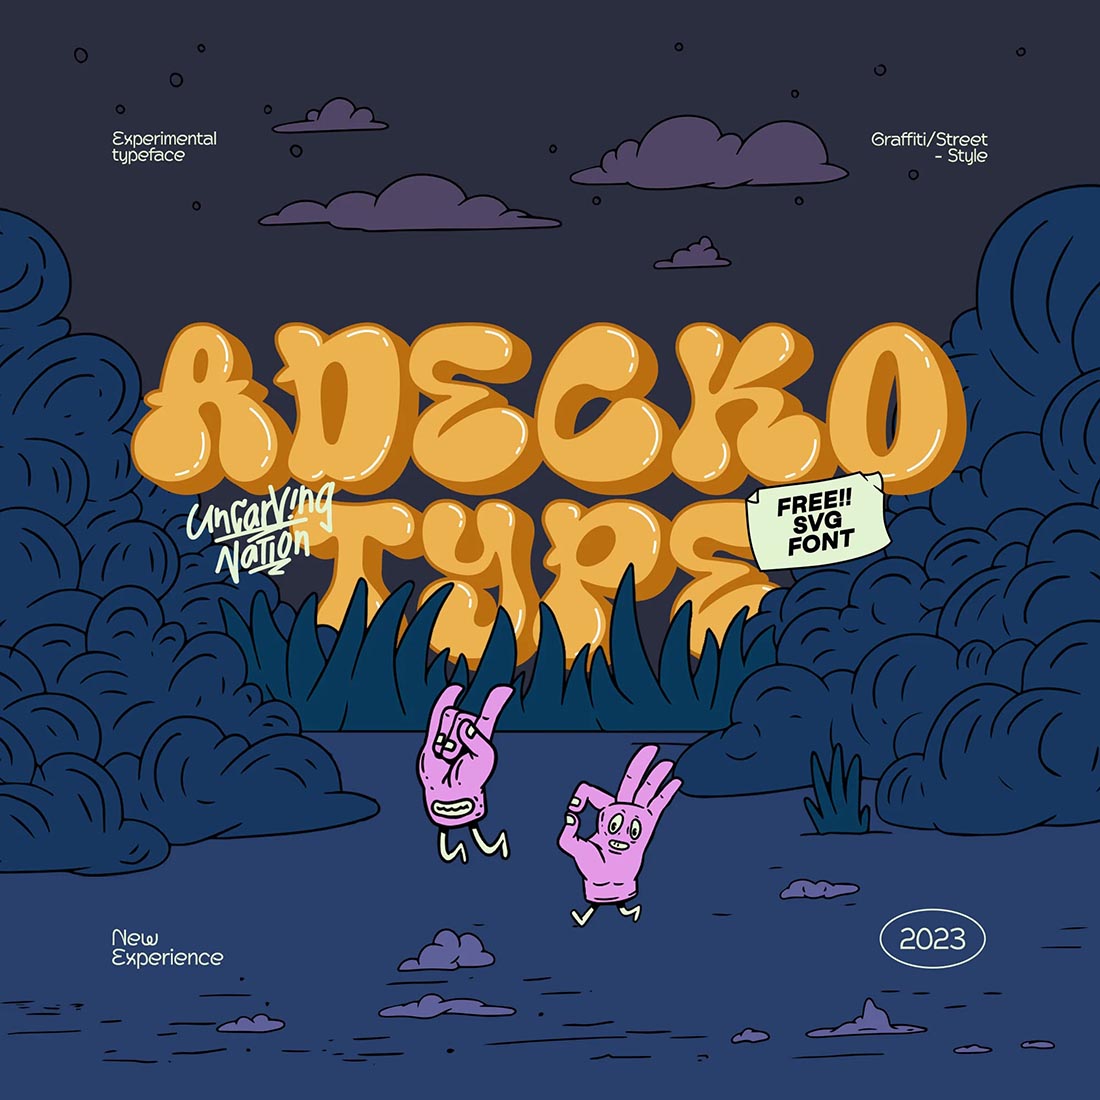 Adecko - Display Font cover image.